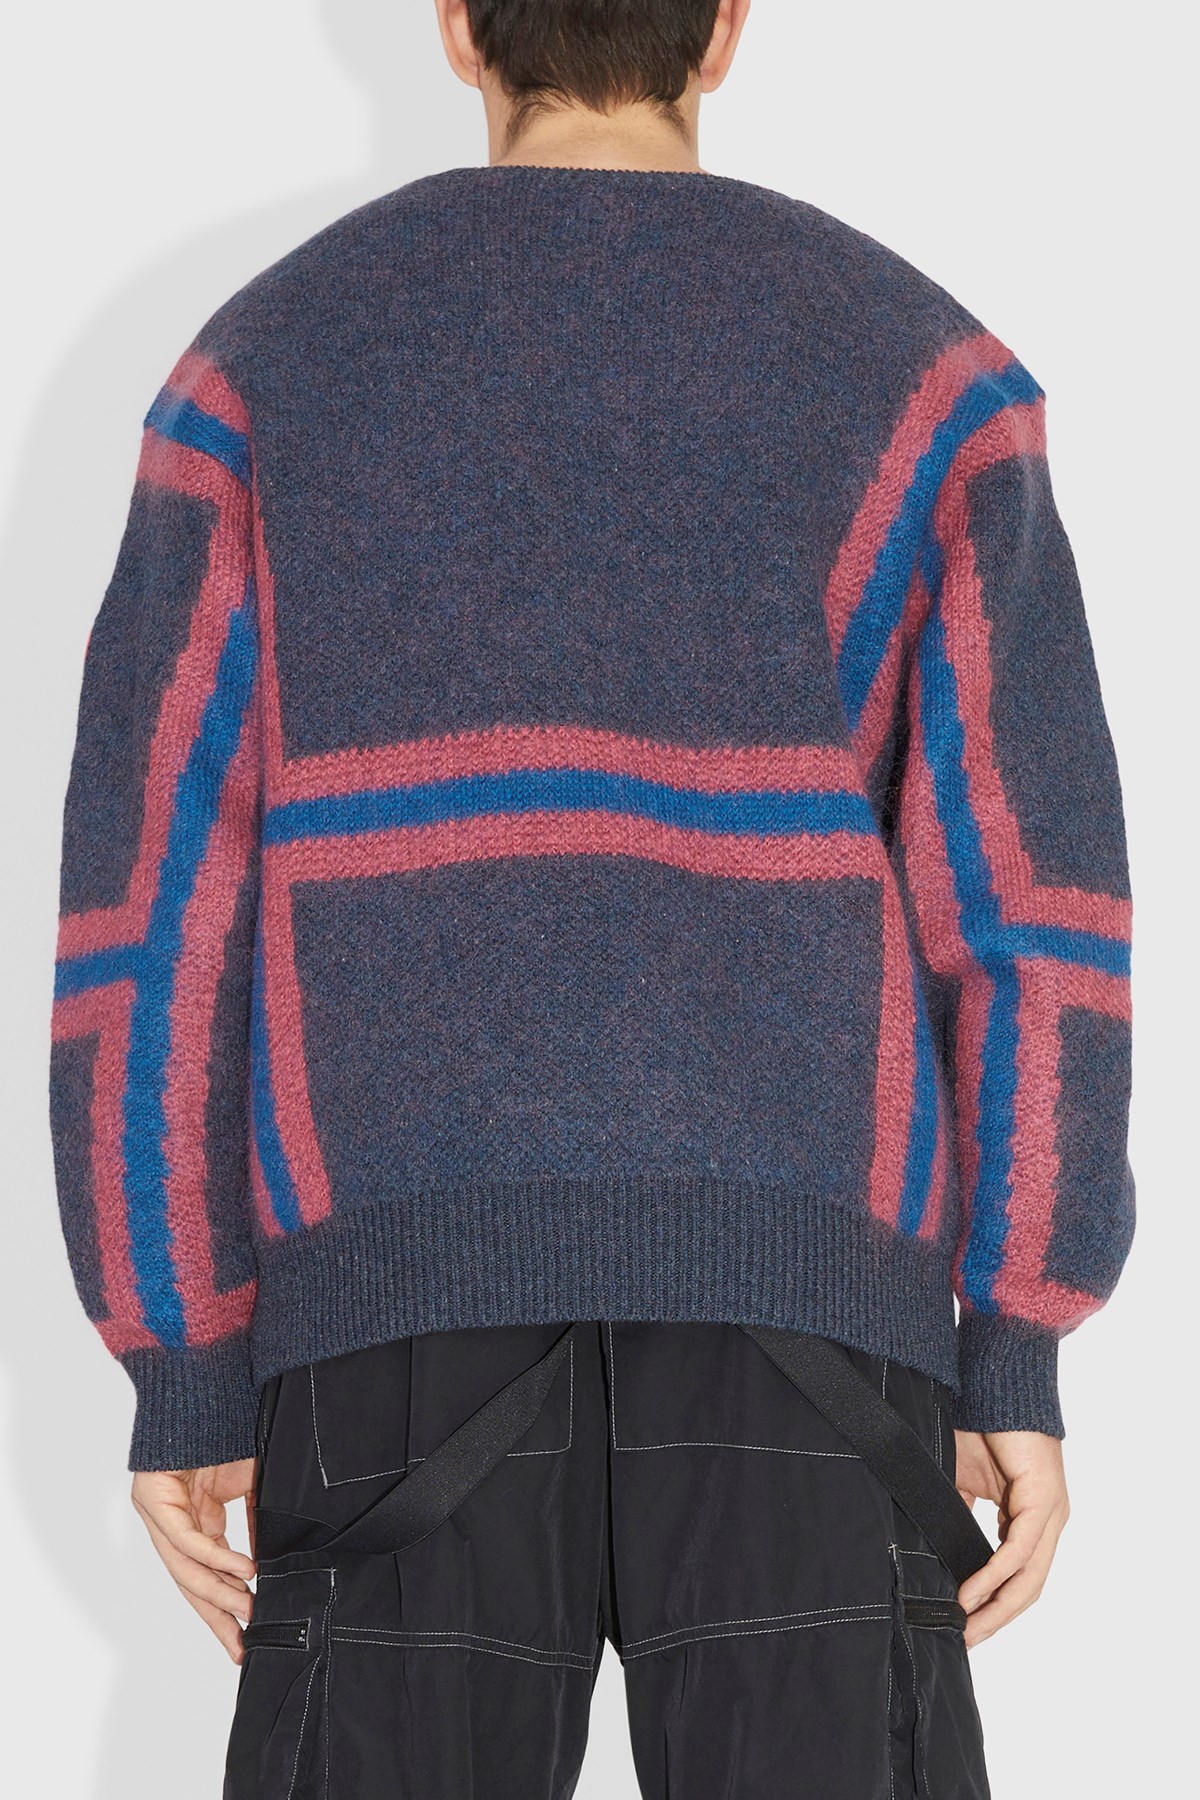 Cav Empt Indefinable Boundary Knit Navy | WoodWood.com